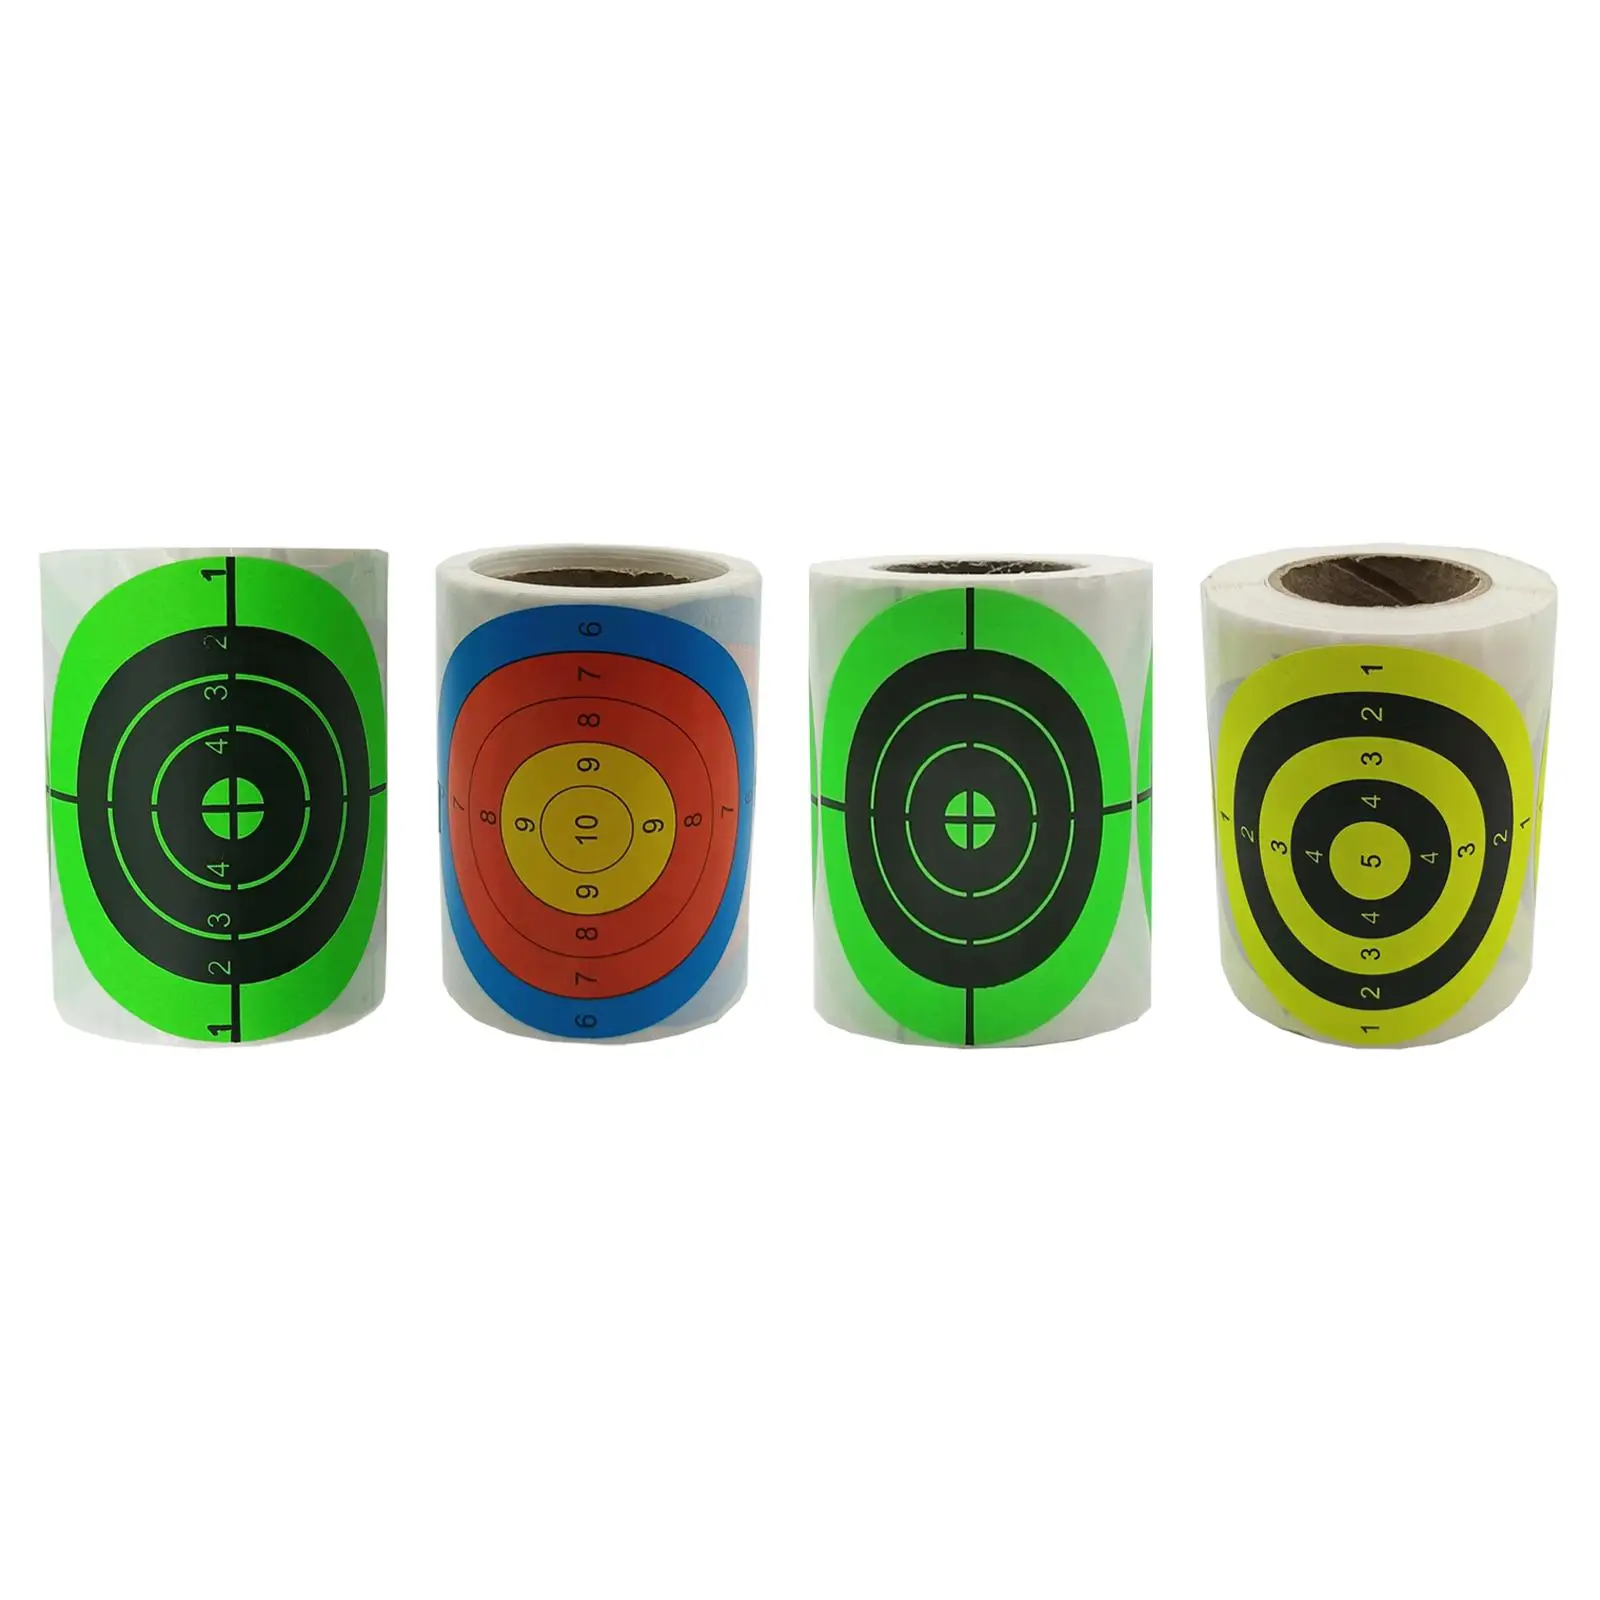 200Pcs Per Roll Durable Splatter Shooting Target Stickers 3inch Splash Target Sticker for Archery Hunting Shooting Accessories